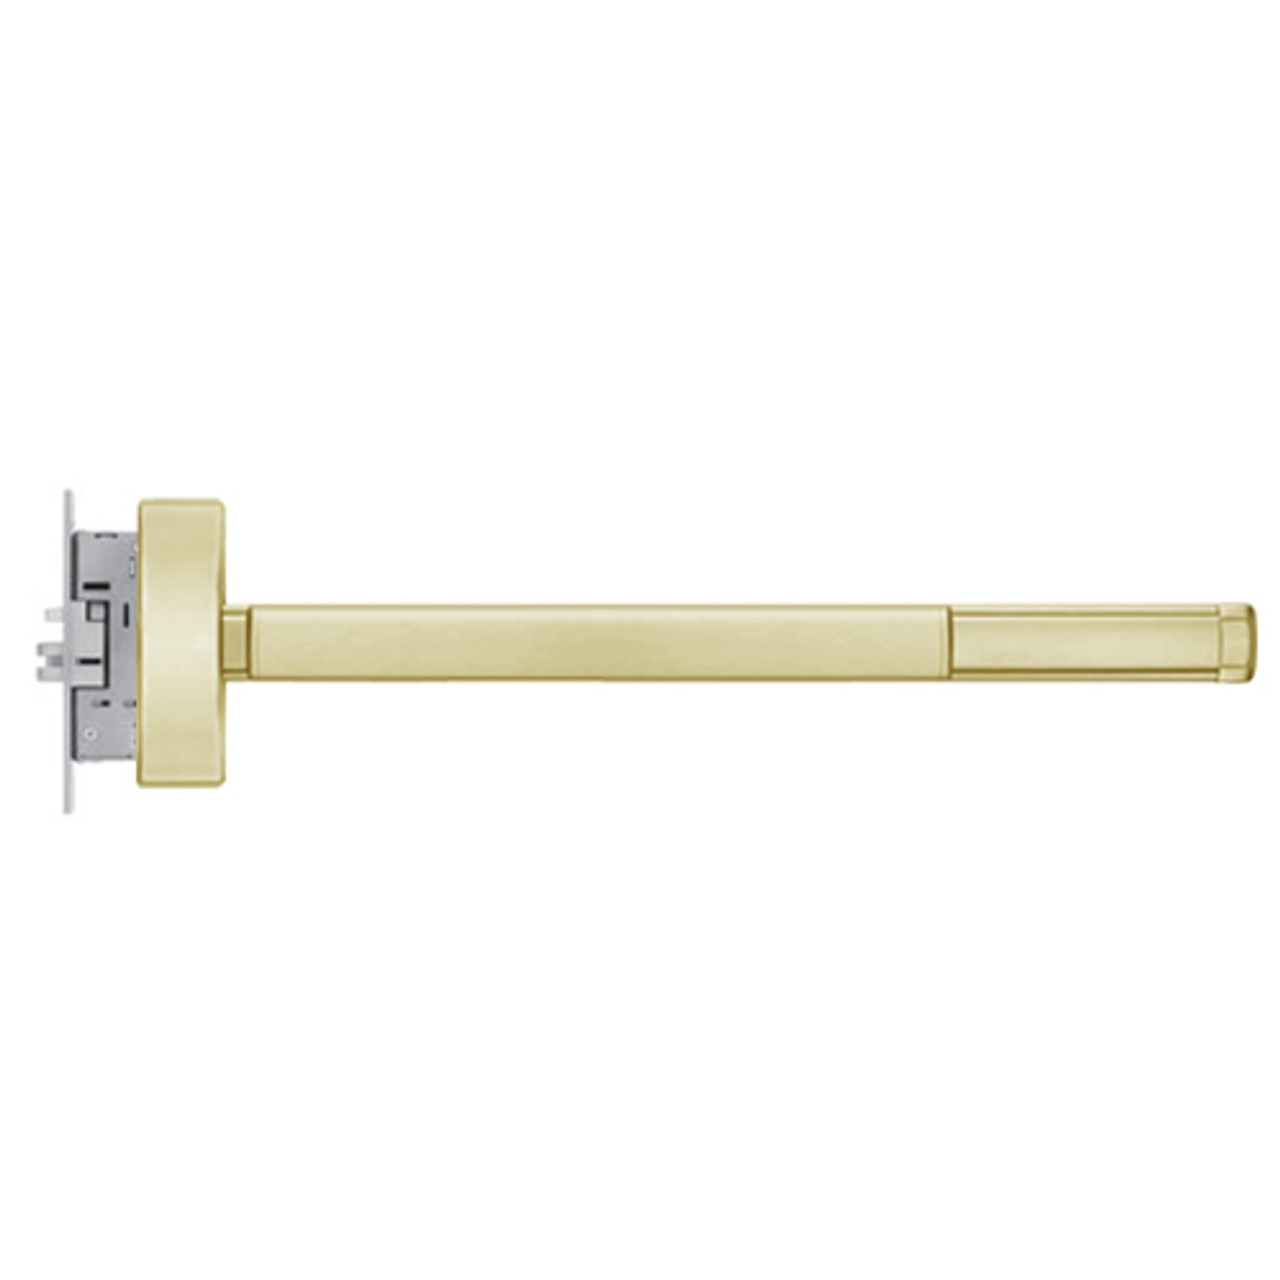 FL2303-LHR-606-36 PHI 2300 Series Fire Rated Apex Mortise Exit Device Prepped for Key Retracts Latchbolt in Satin Brass Finish